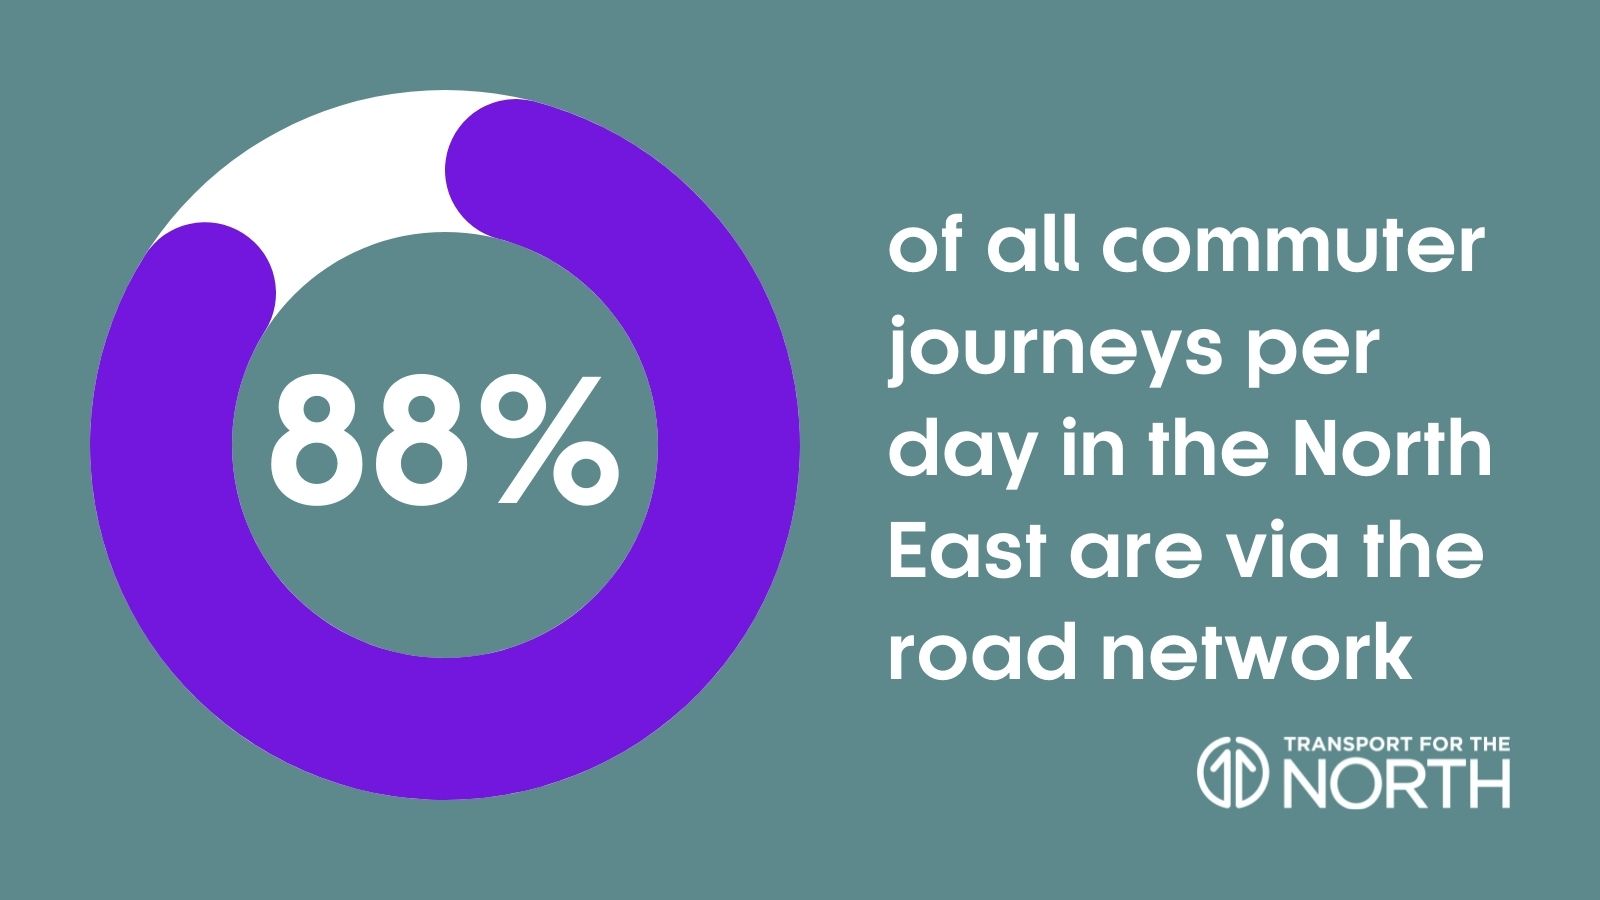 88% of all commuter journeys per day in the North East are via the road network